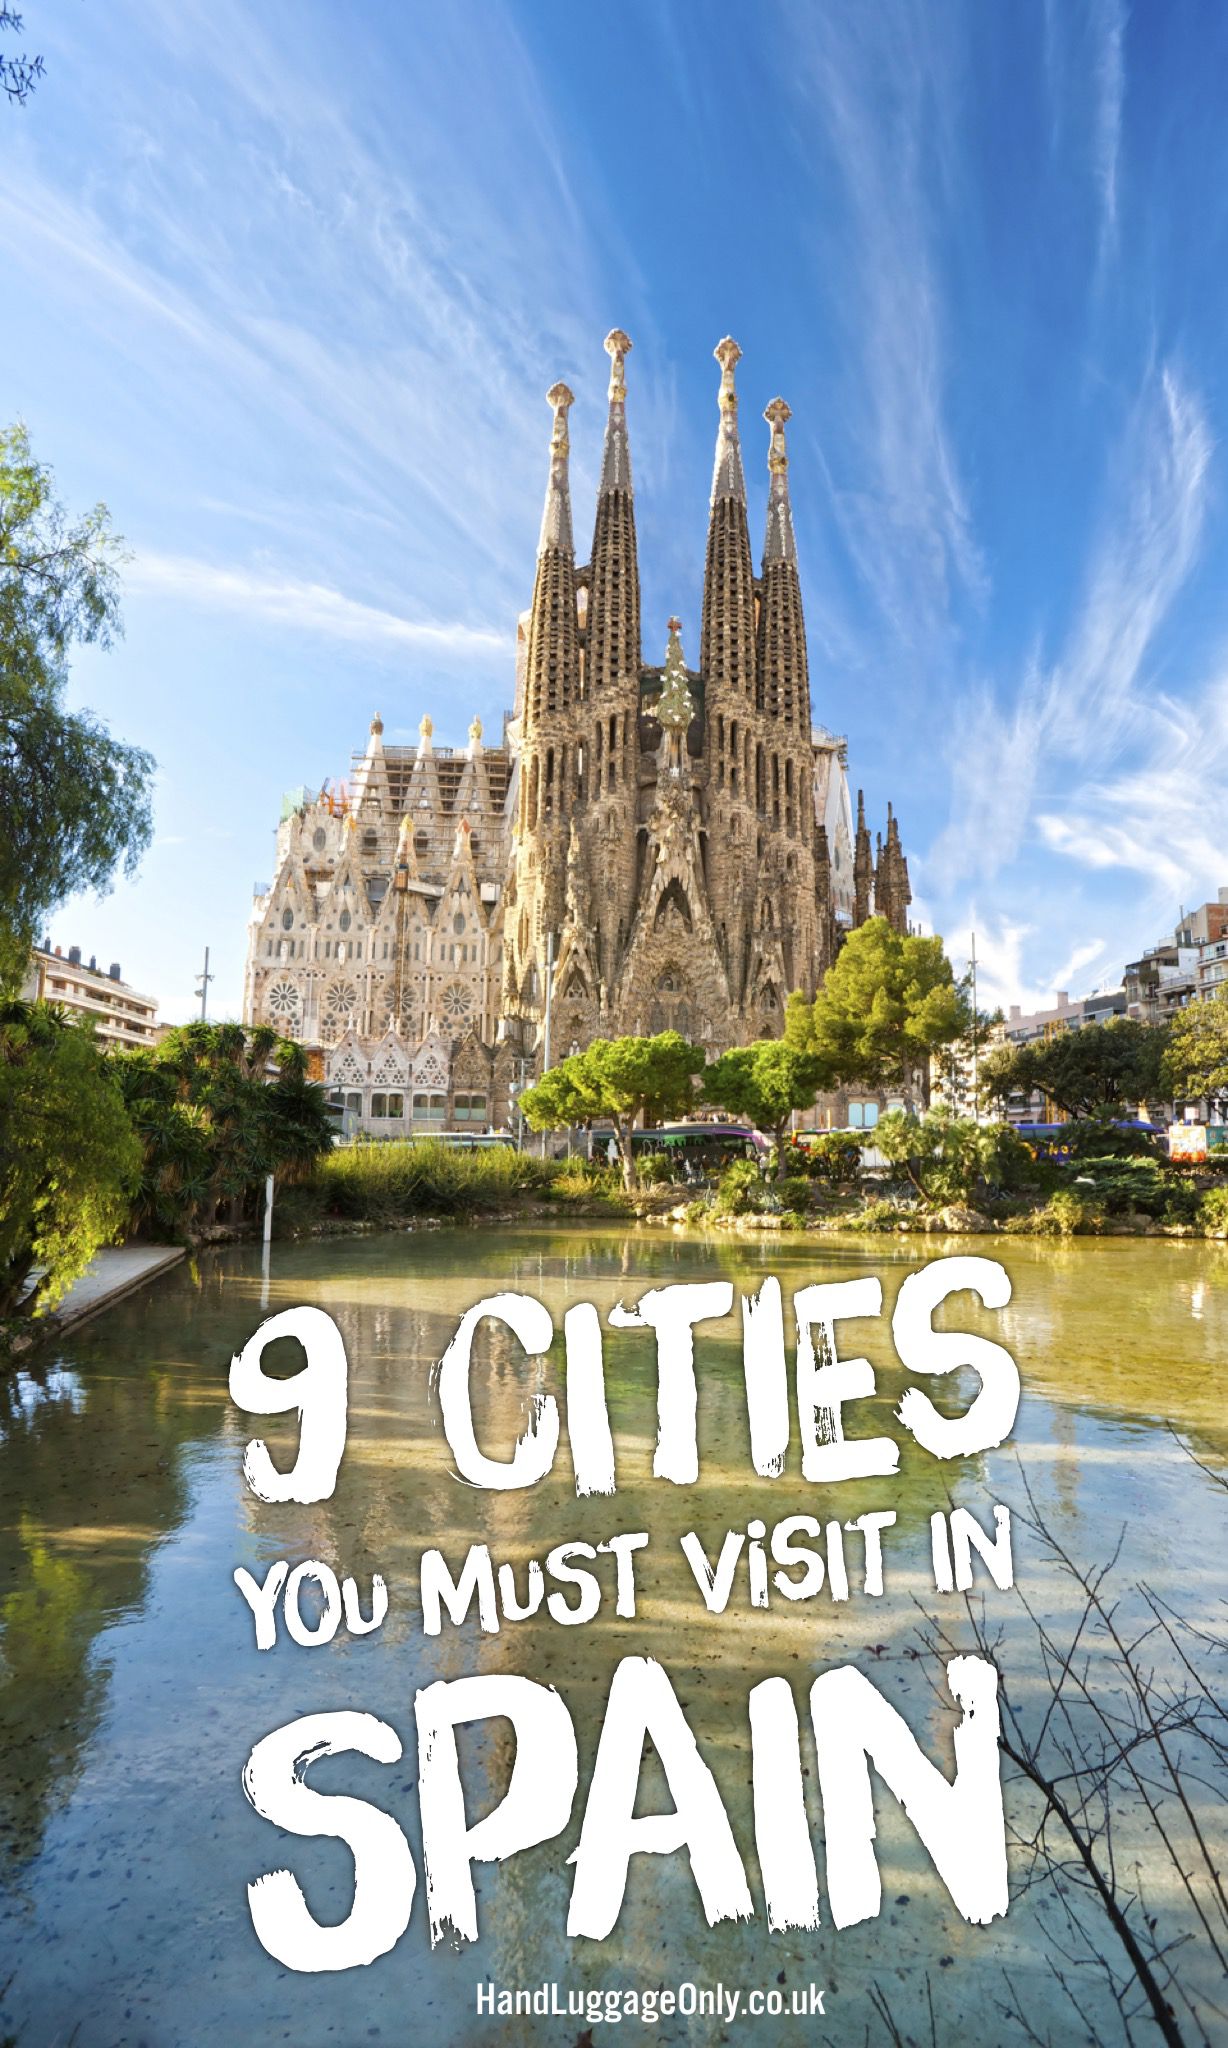 9 Cities You Must Visit In Spain! - Hand Luggage Only - Travel, Food & Photography Blog1228 x 2048